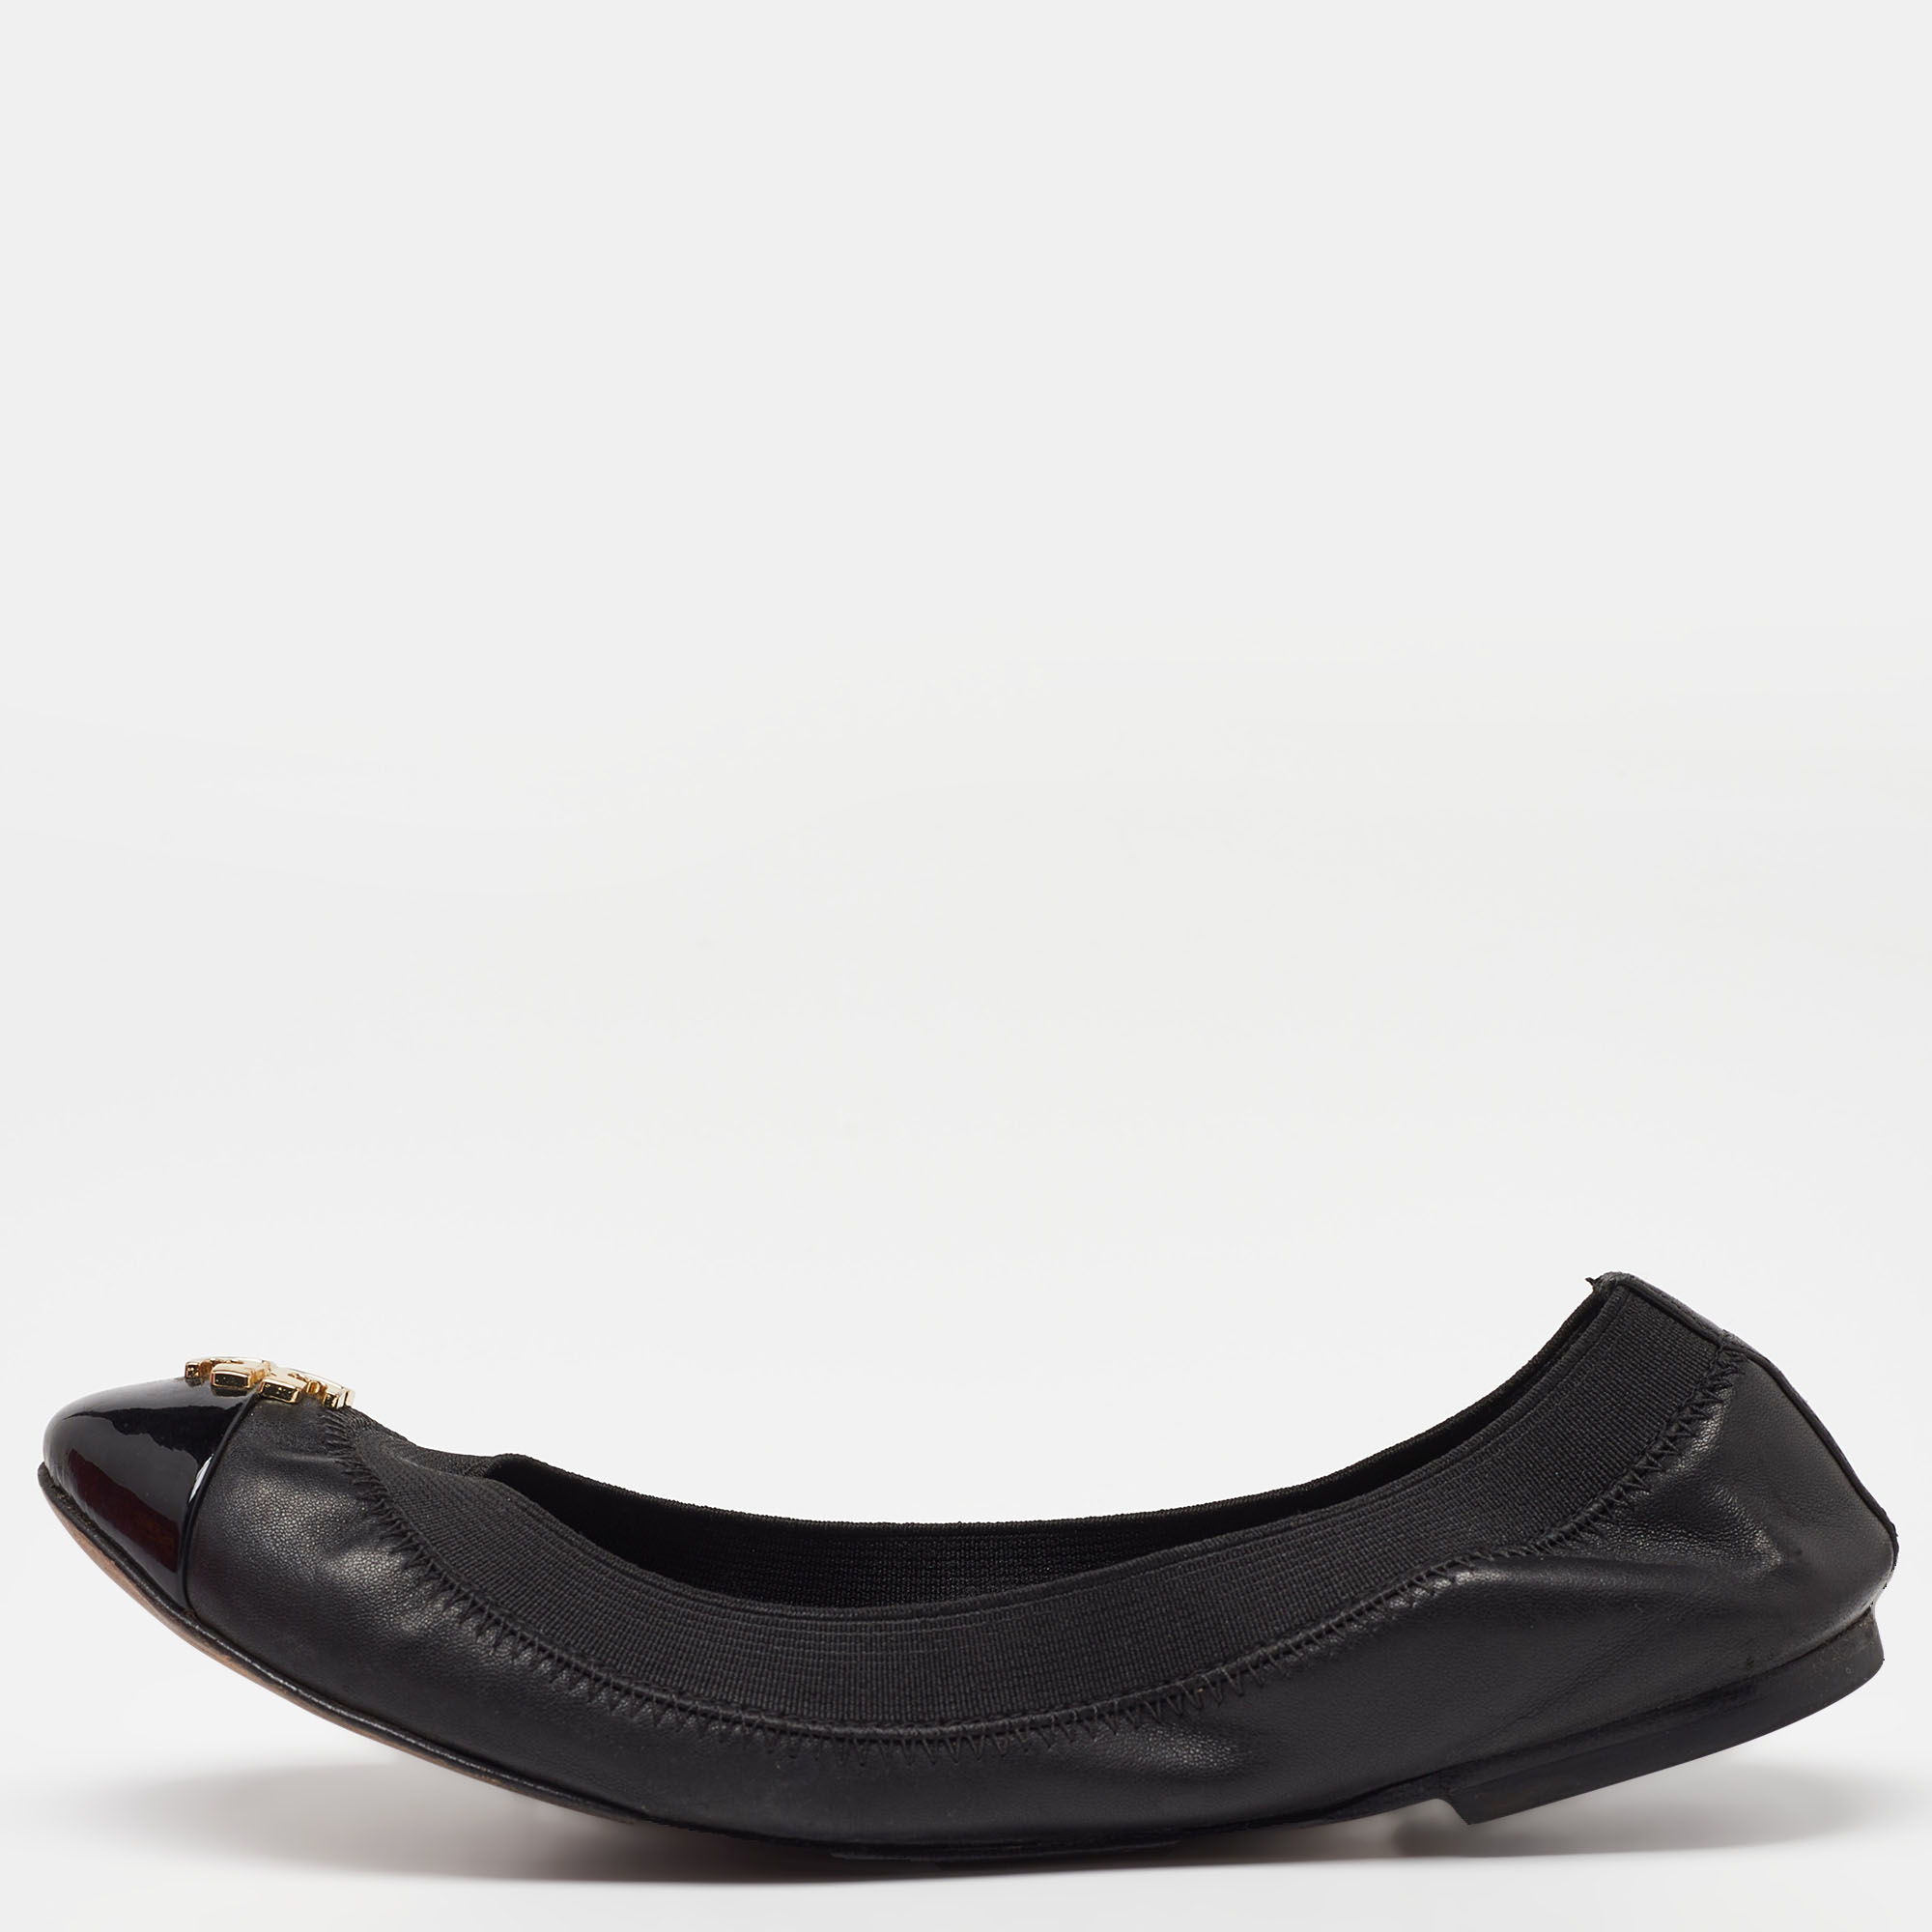 Tory burch black patent and leather jolie scrunch ballet flats size 35.5